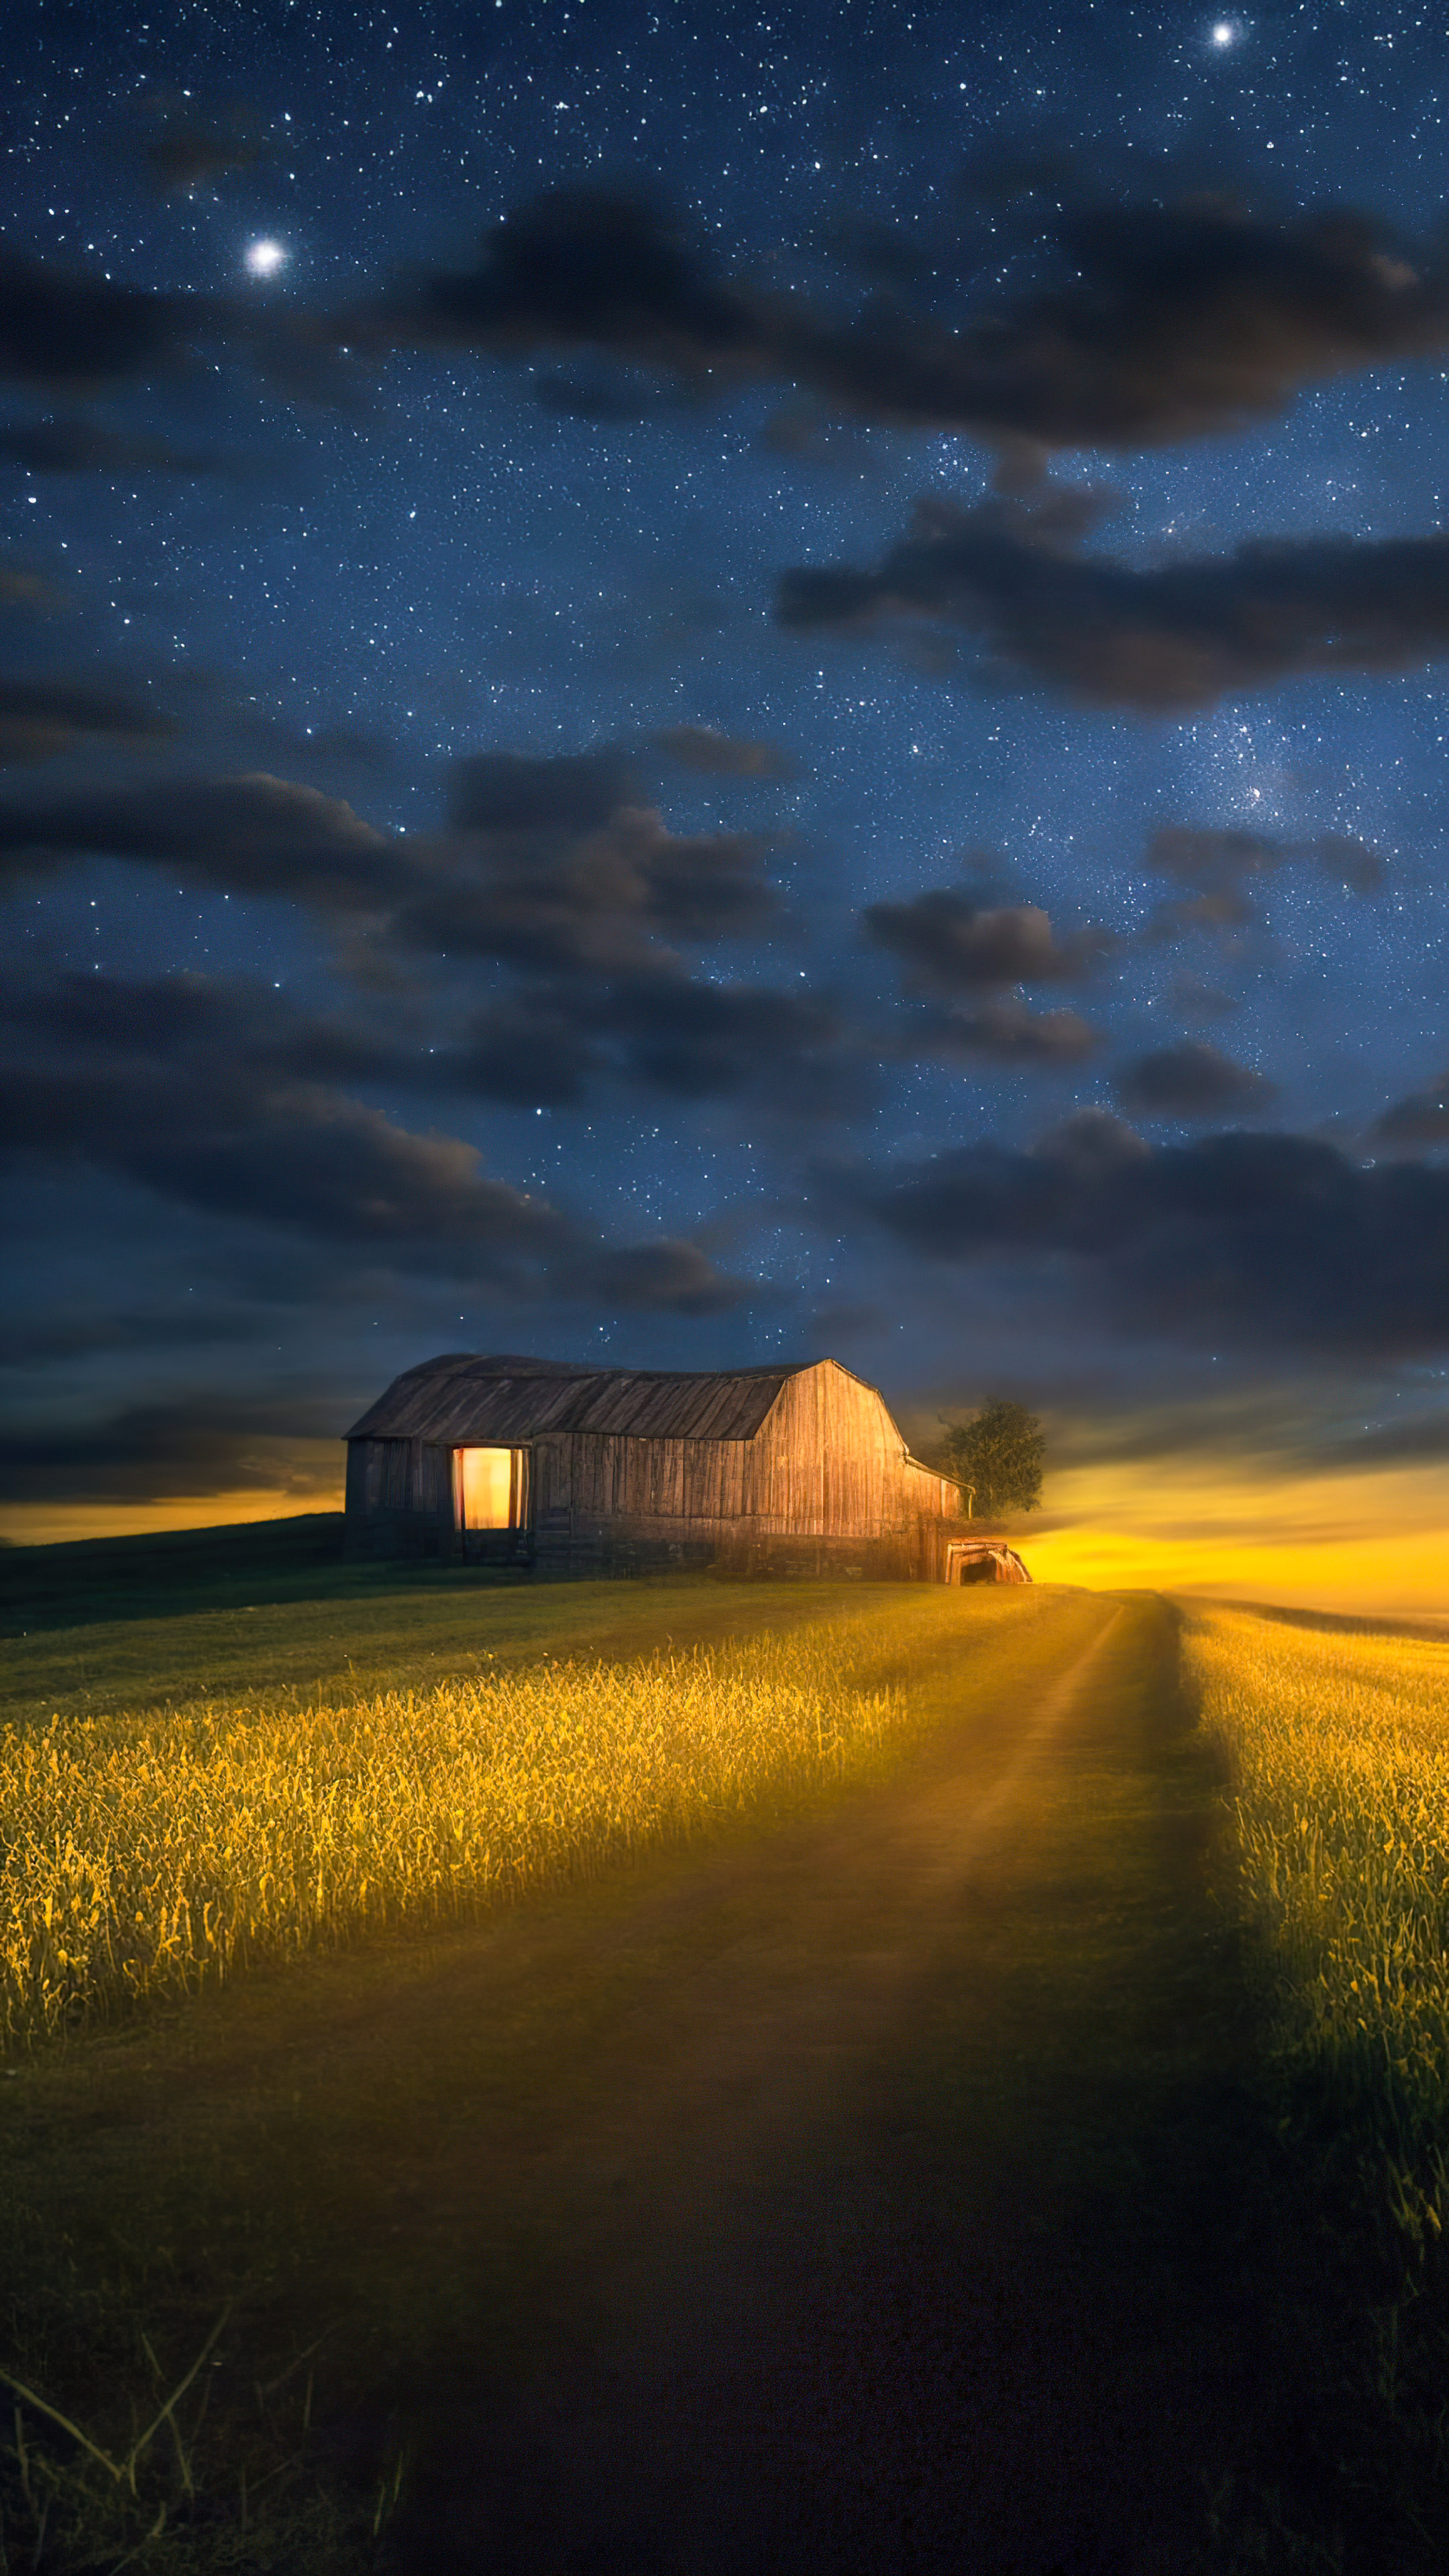 The best nature wallpaper in 4K for your mobile awaits you, featuring a serene countryside scene, a rustic barn, fireflies, and a clear, starry night sky.